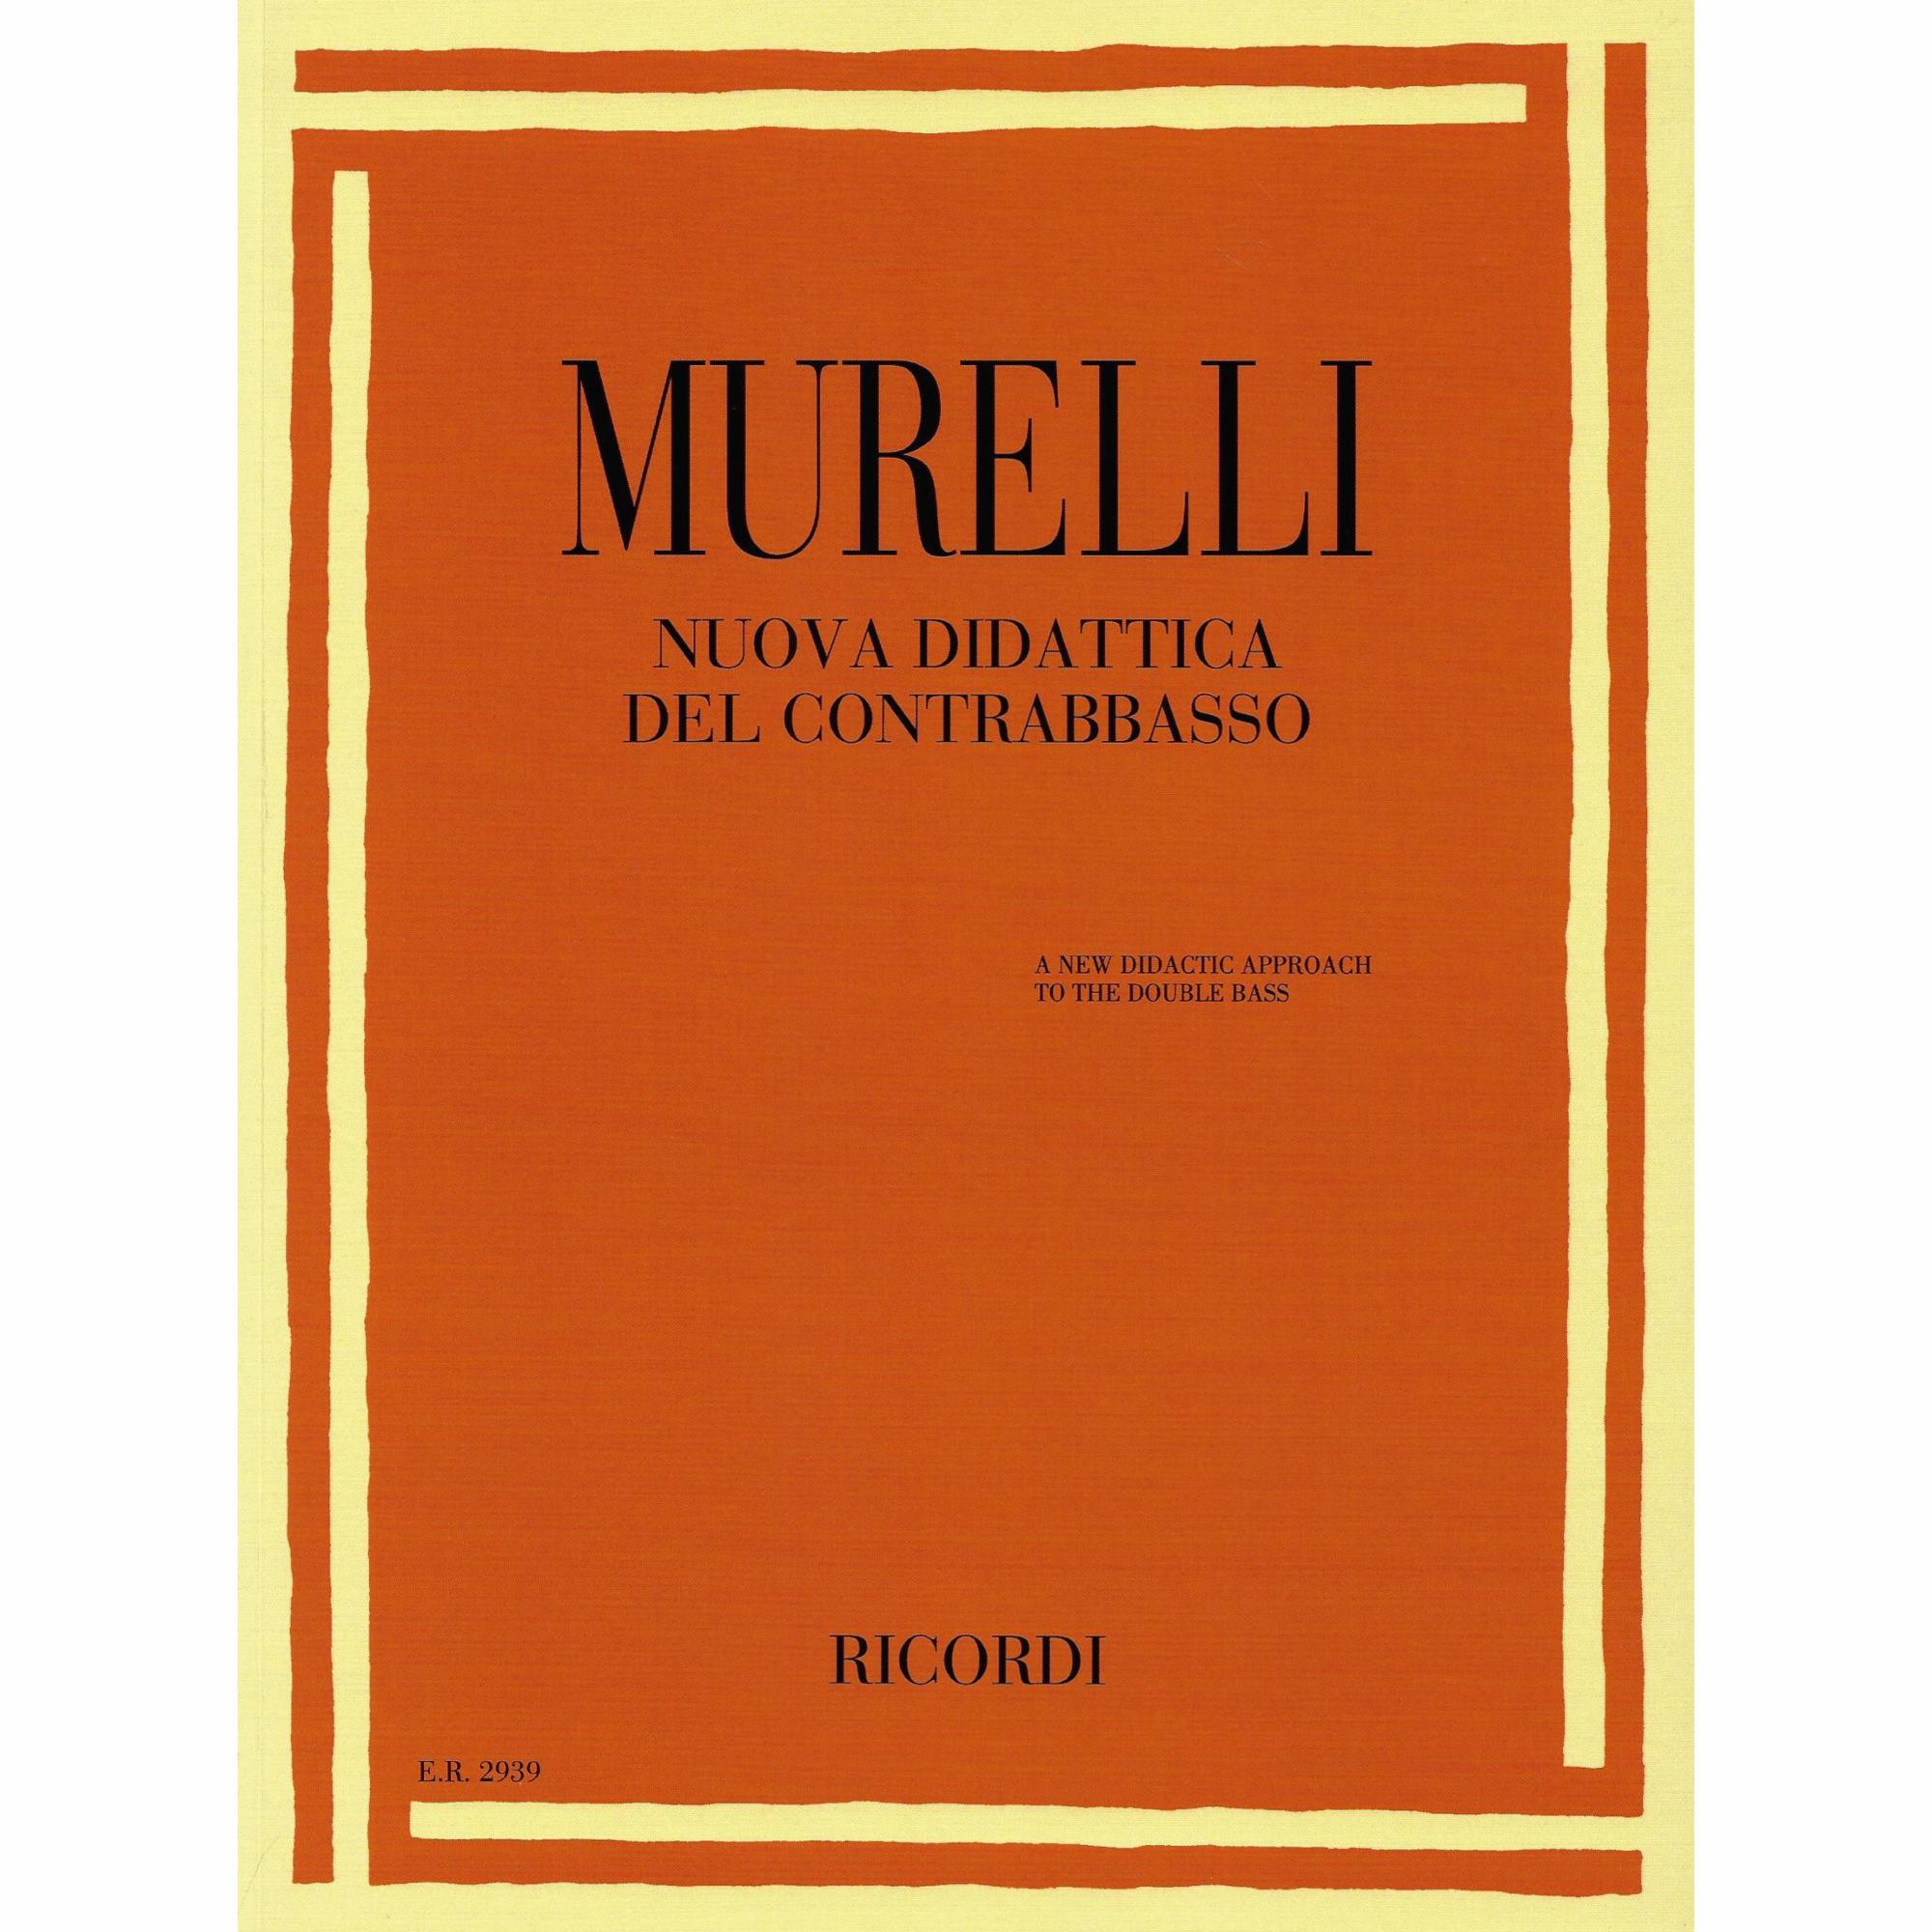 Murelli -- A New Didactic Approach to the Double Bass